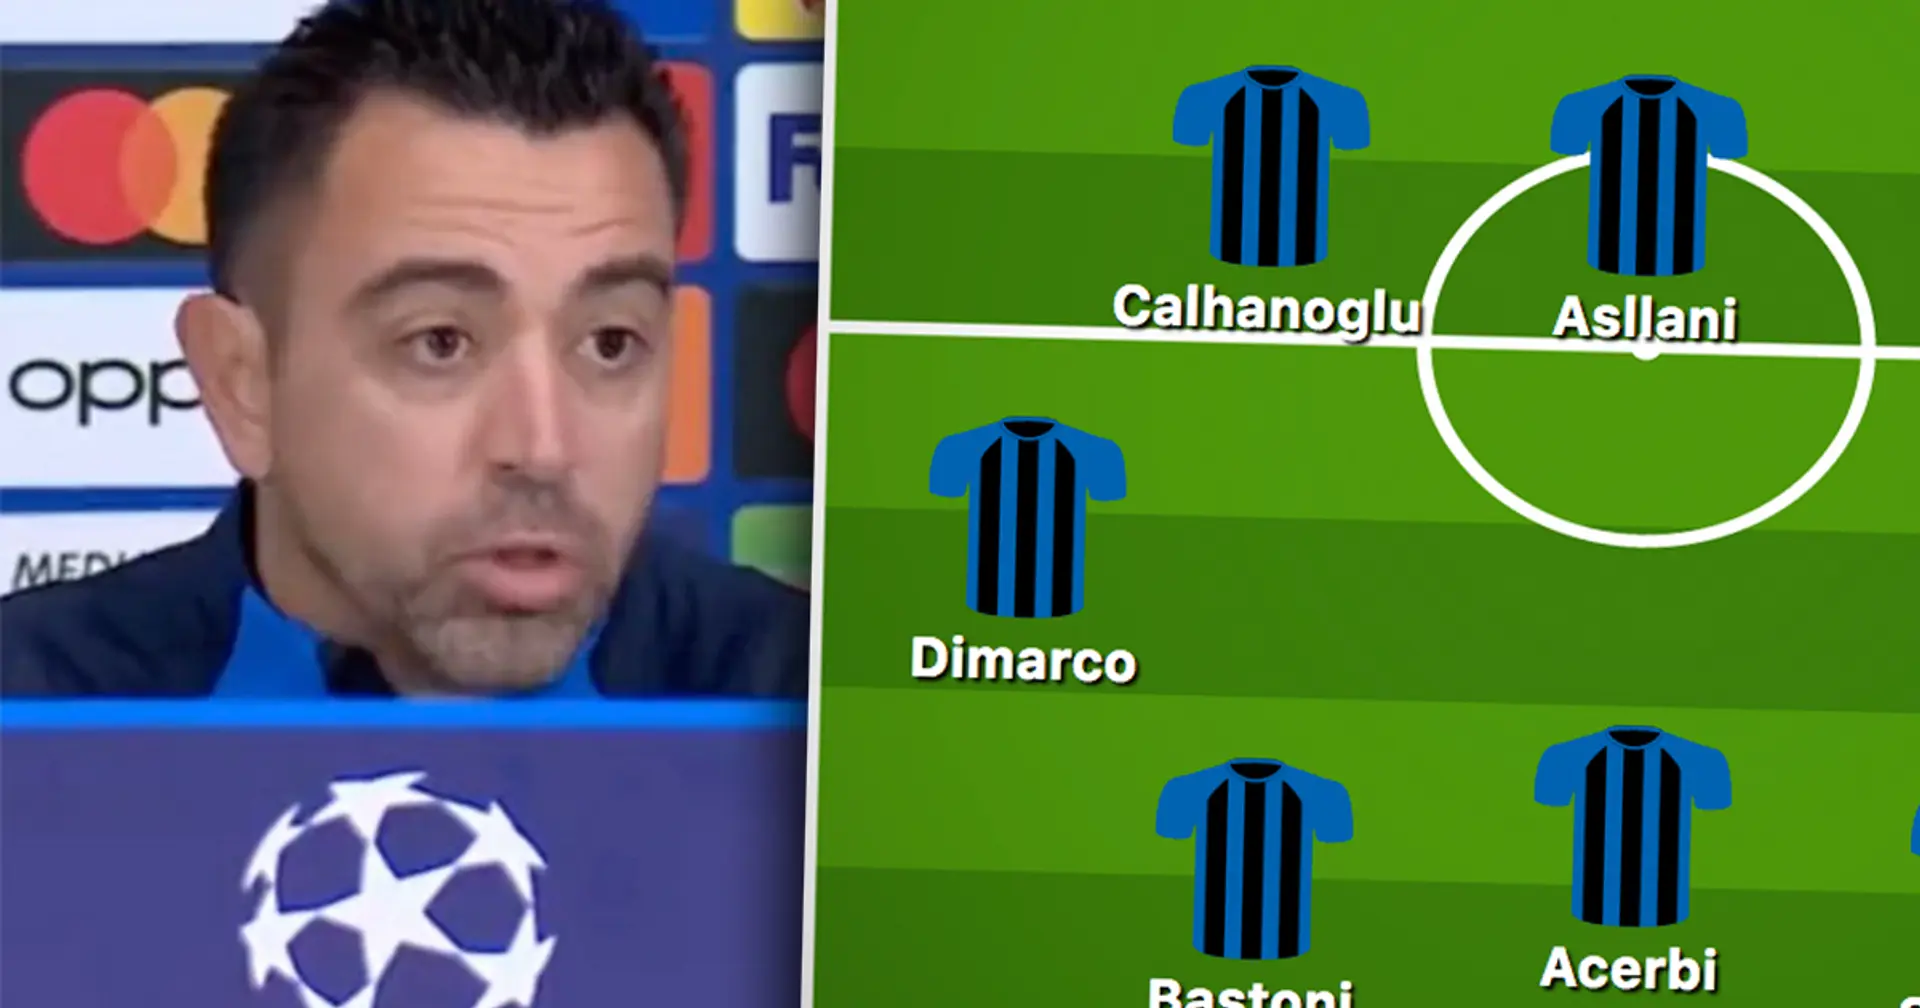 Xavi says Inter game will be different from any of La Liga's – due to their special formation